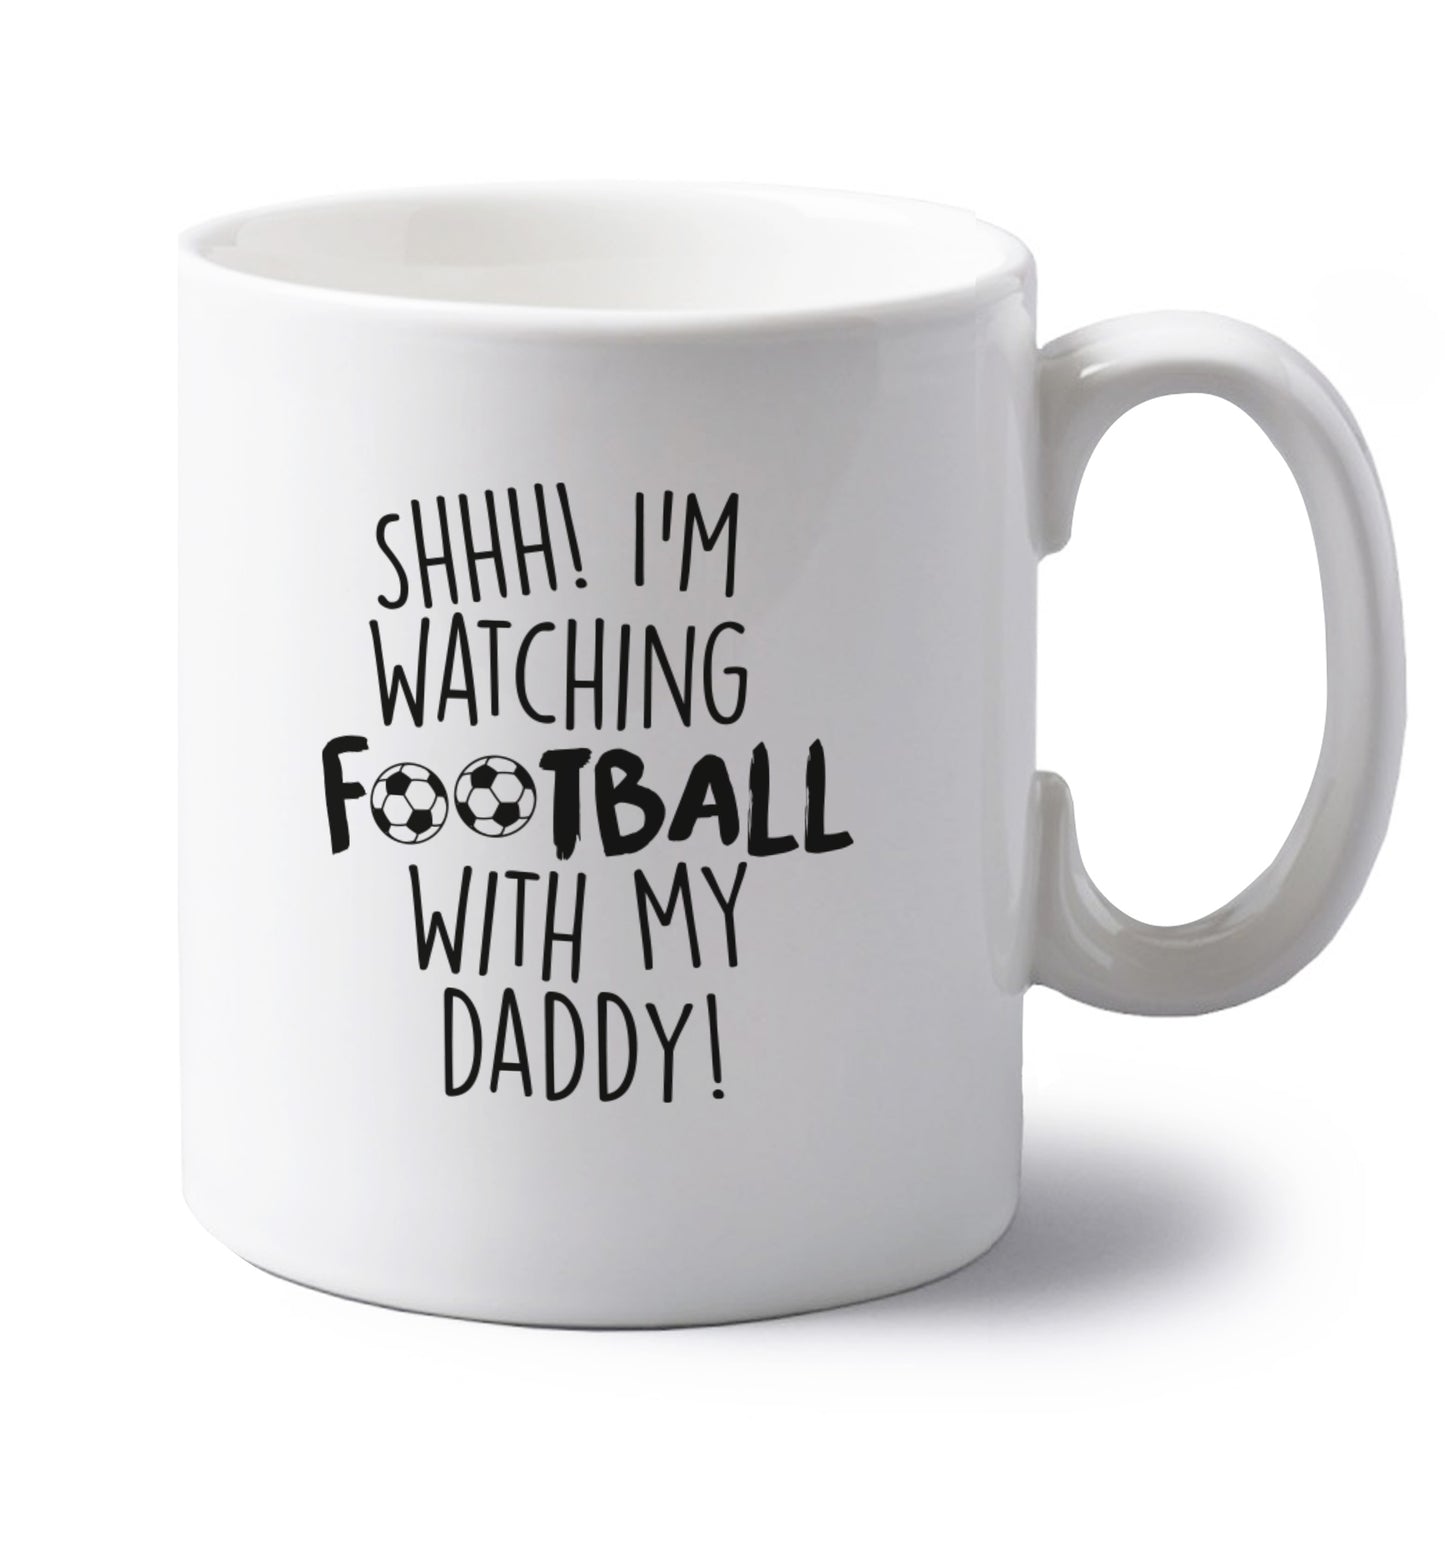 Shhh I'm watching football with my daddy left handed white ceramic mug 